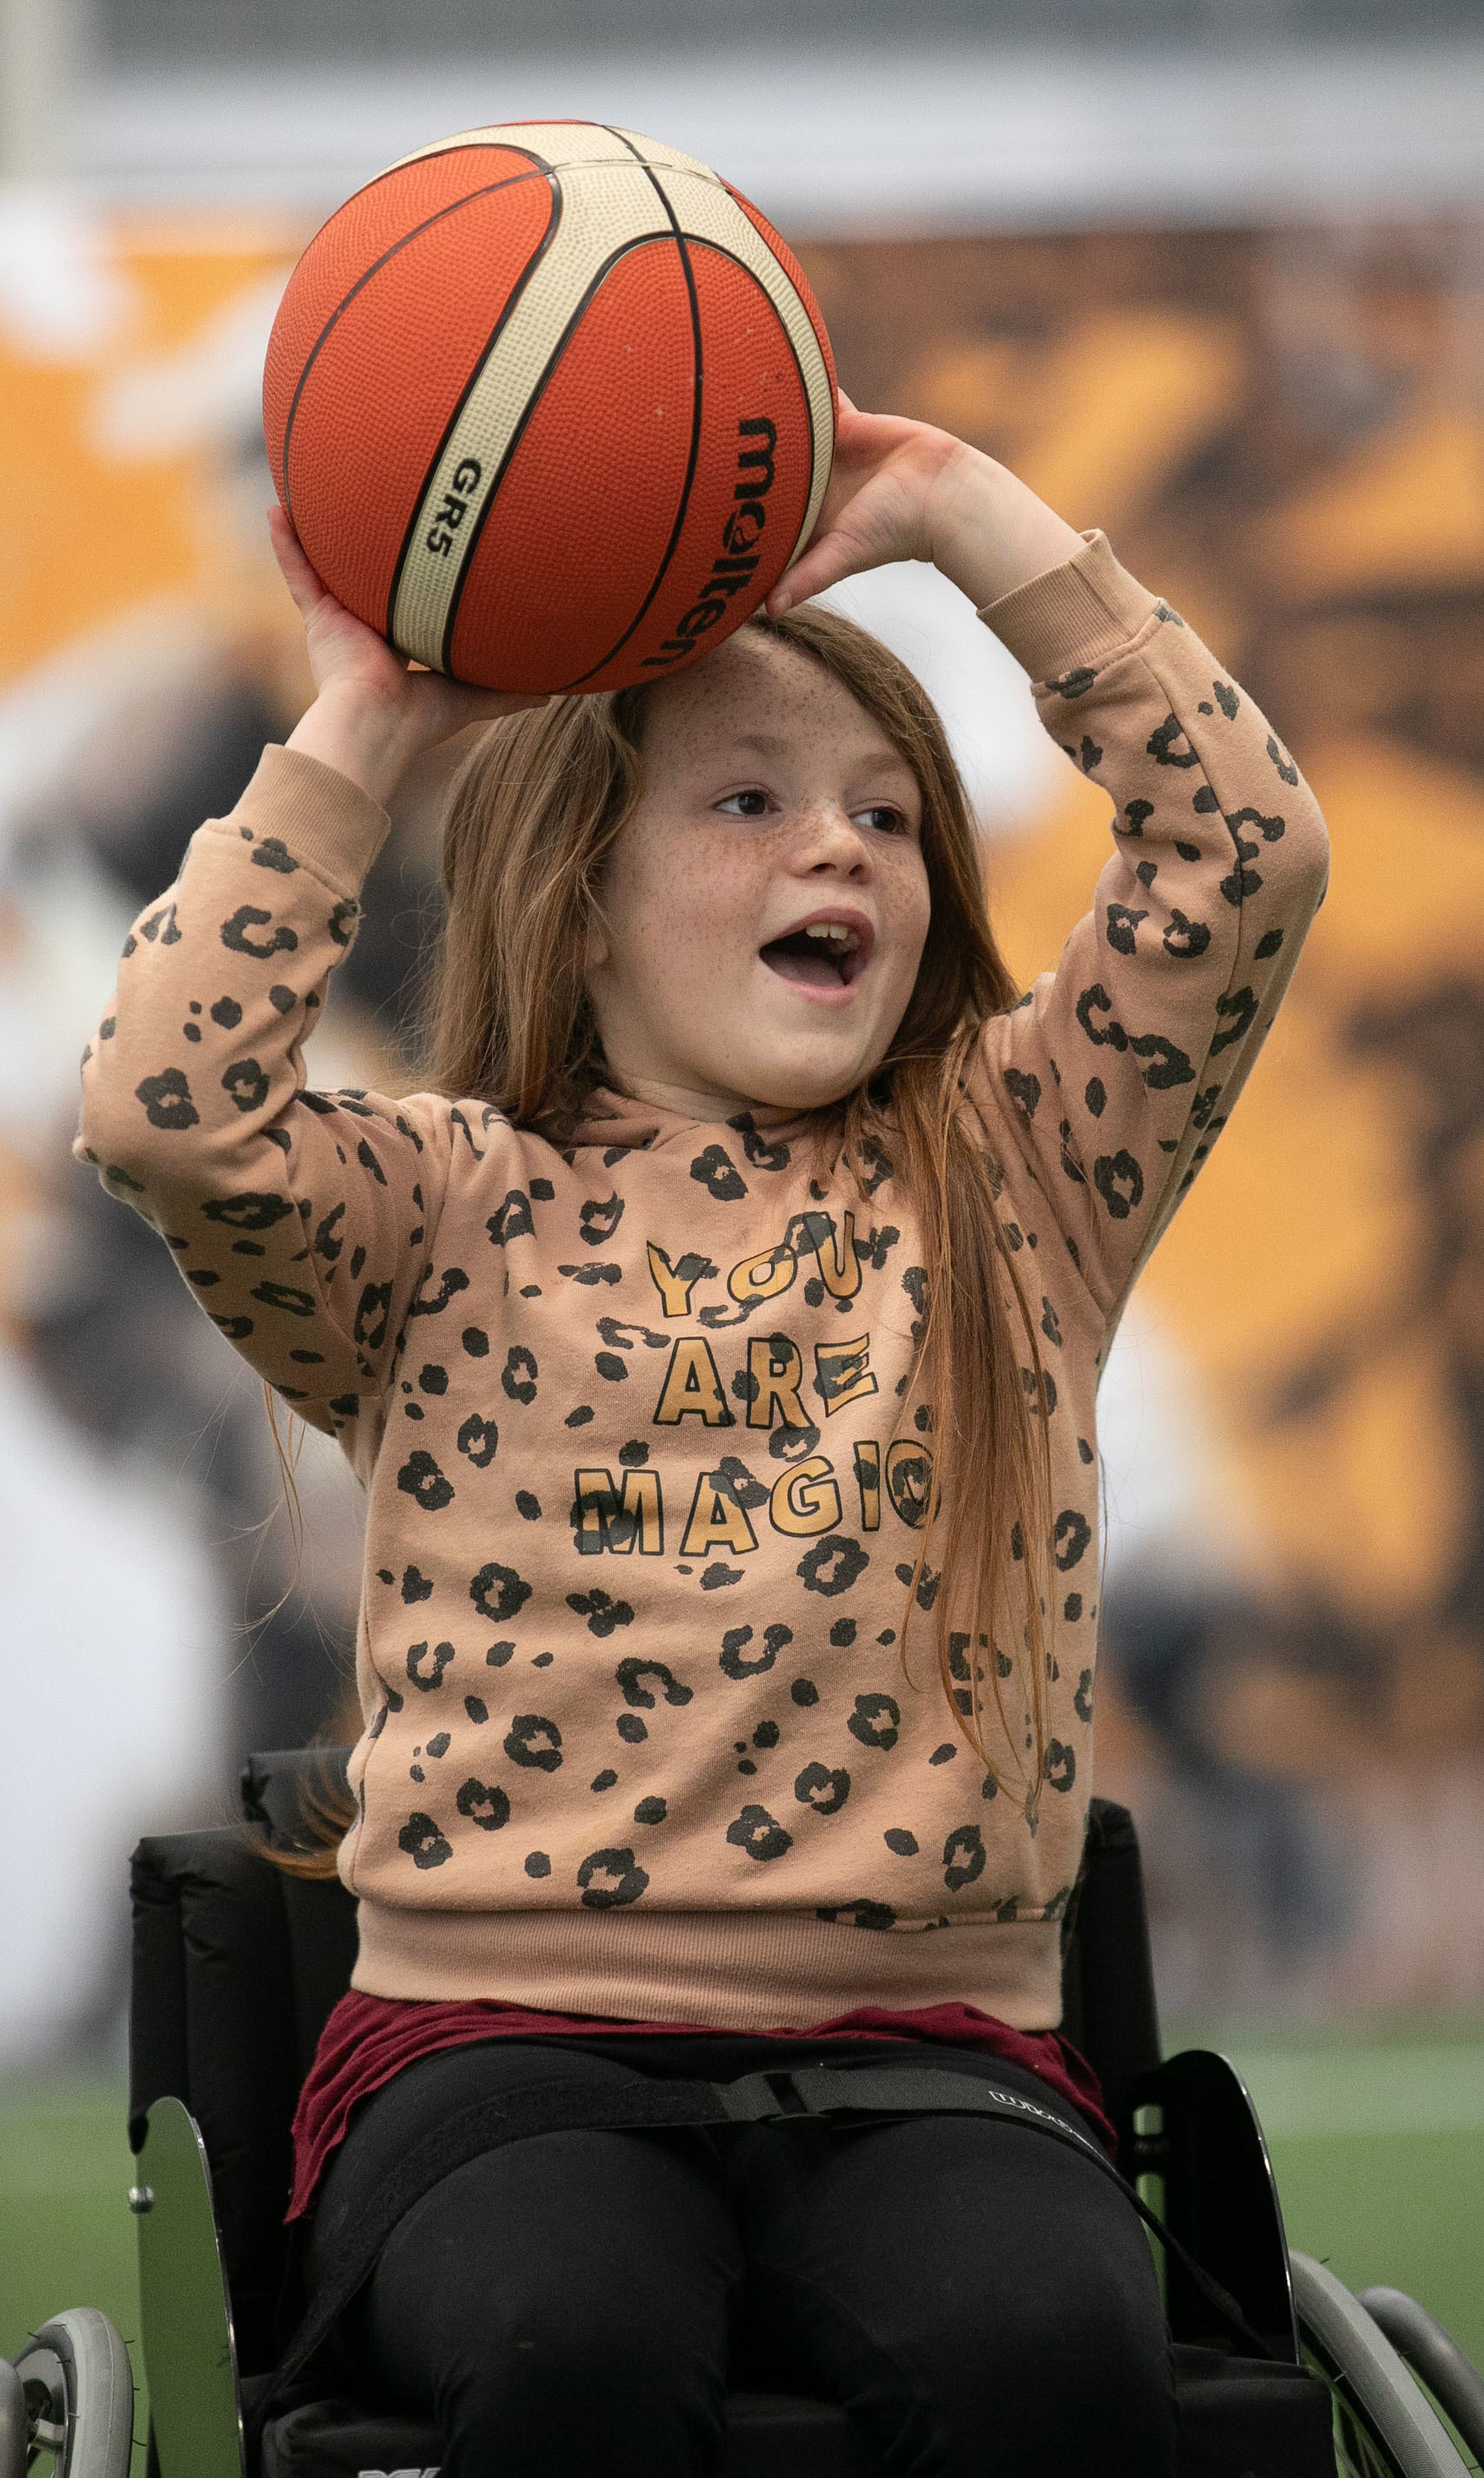 Cartrefi Conwy Sport for Kids event at Eirias Park before the RGC 1404 v Ebbw Vale rugby match Trying wheelchair basketball - Lola Fishwick